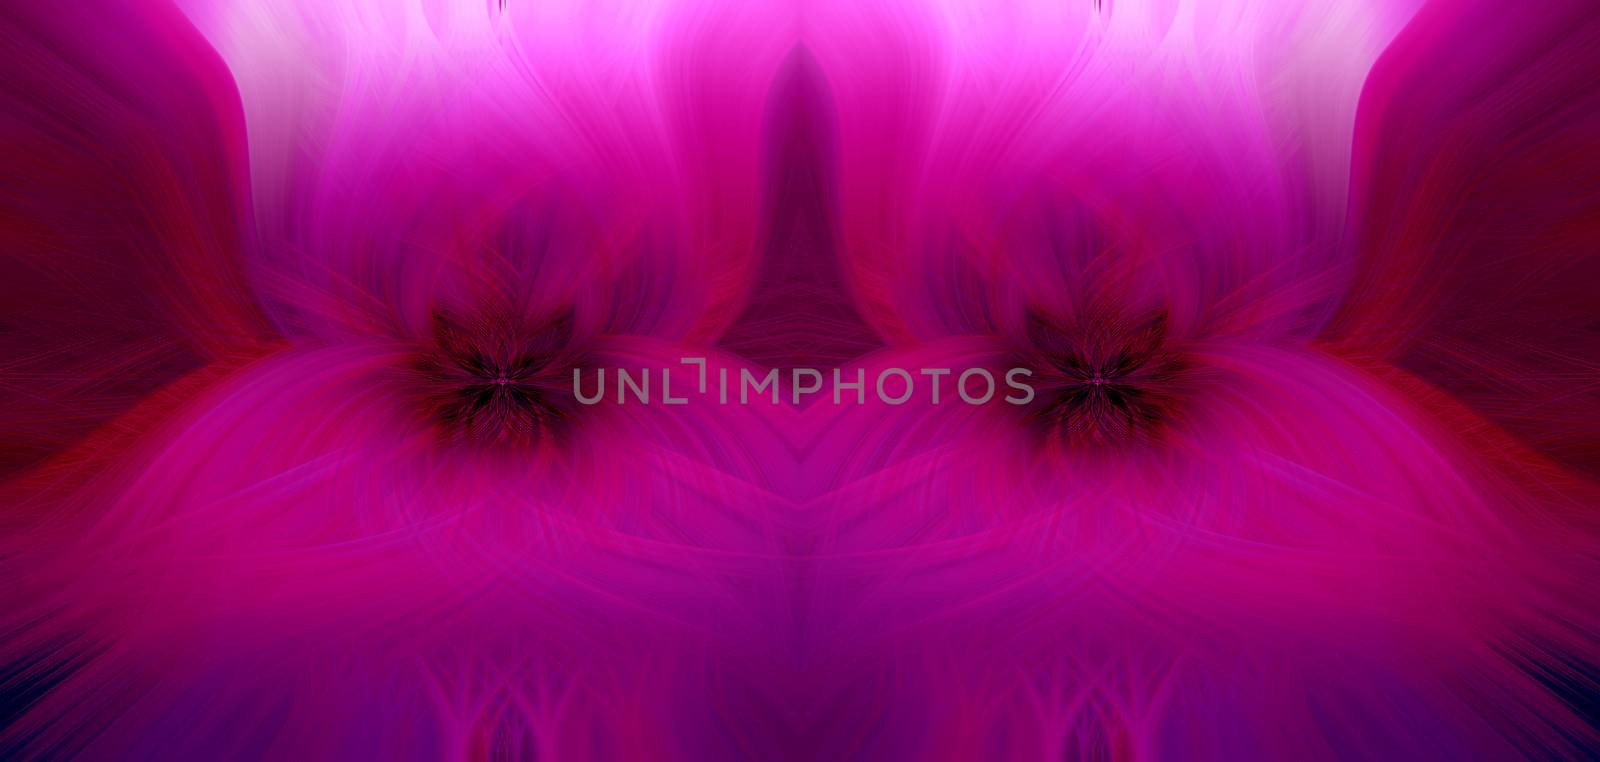 Beautiful abstract intertwined 3d fibers forming a shape of sparkle, flame, flower. Pink, blue, maroon, and purple colors. Illustration.